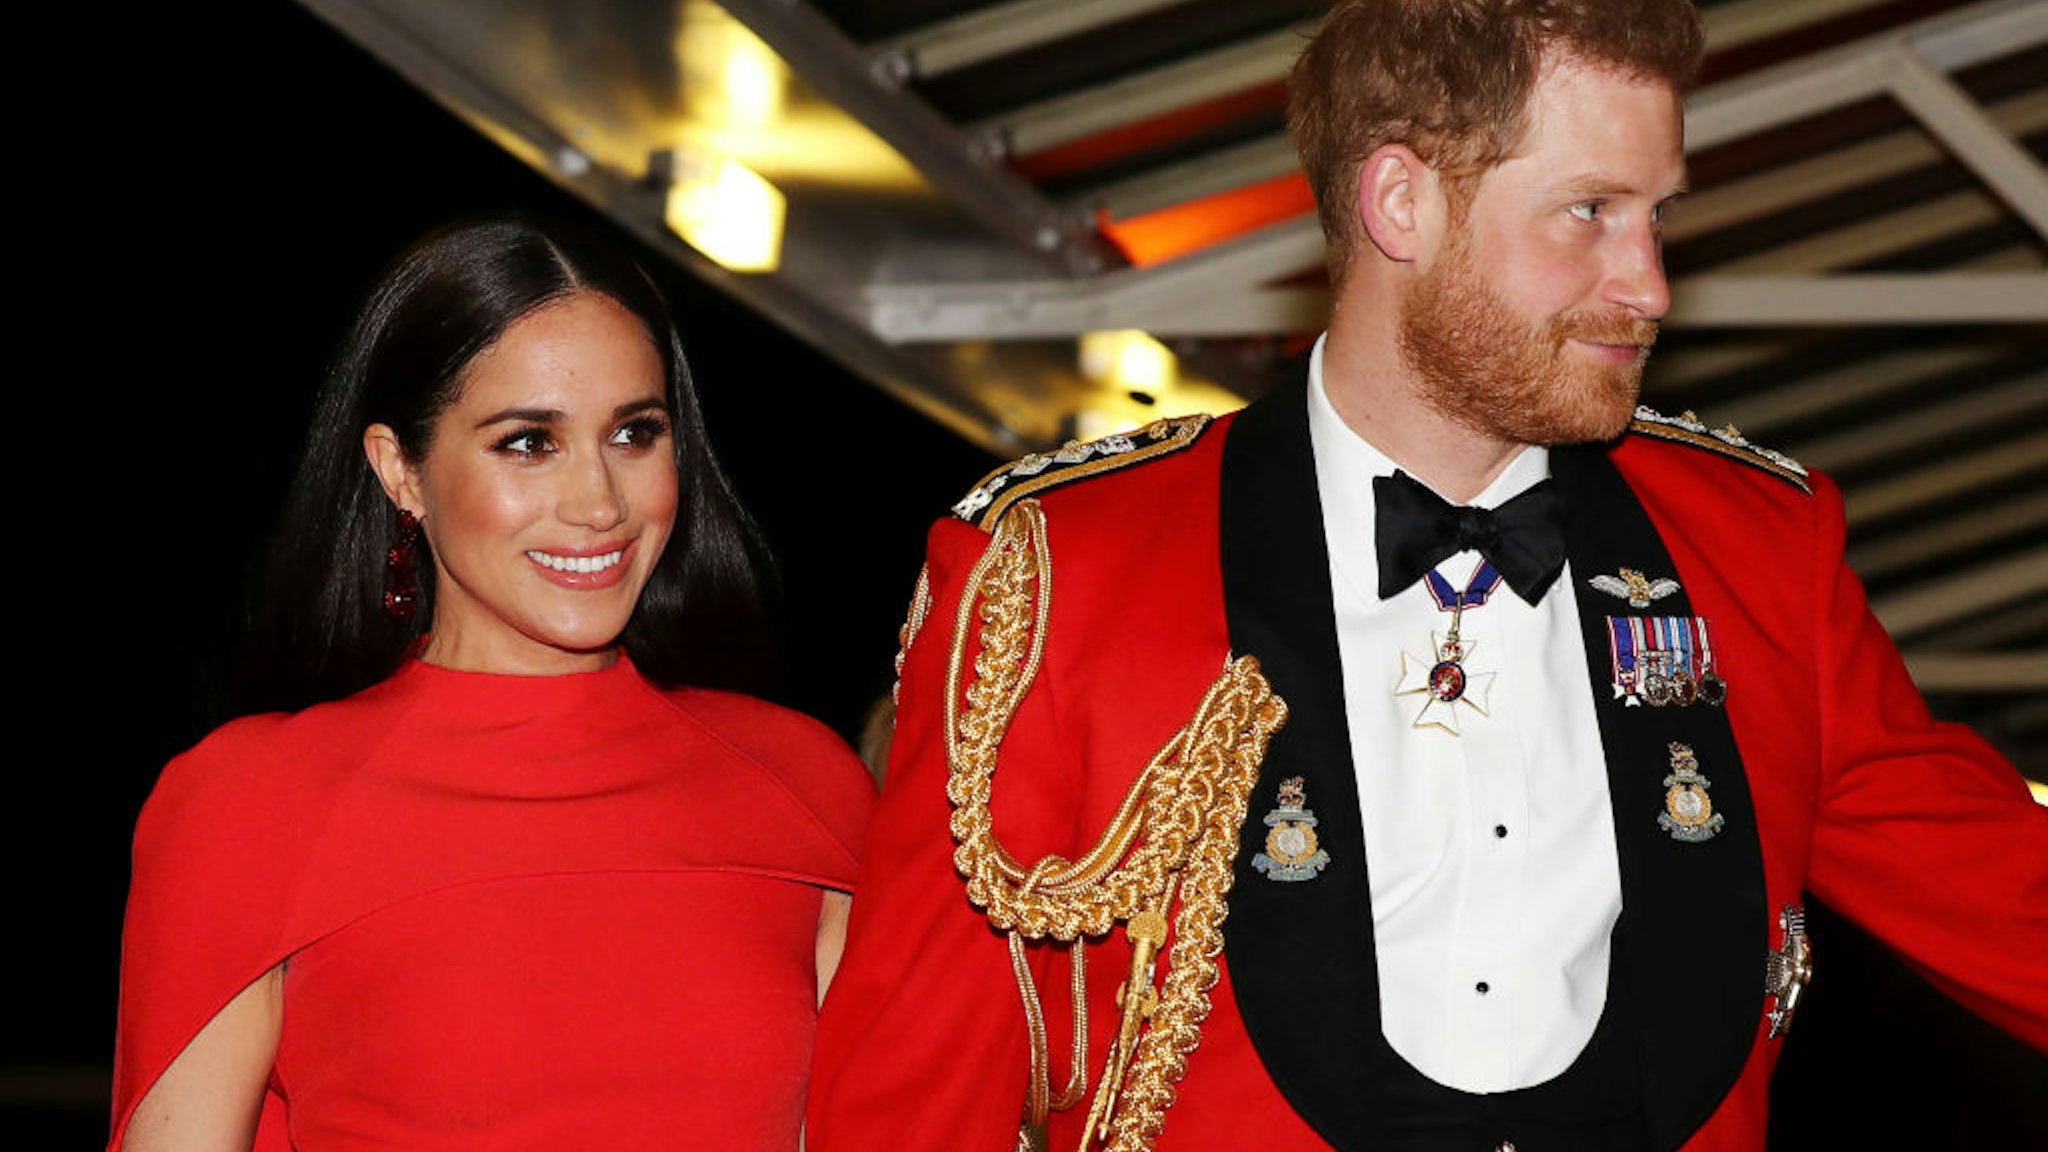 Prince Harry, Duke of Sussex and Meghan, Duchess of Sussex arrive to attend the Mountbatten Music Festival at Royal Albert Hall on March 7, 2020 in London, England.